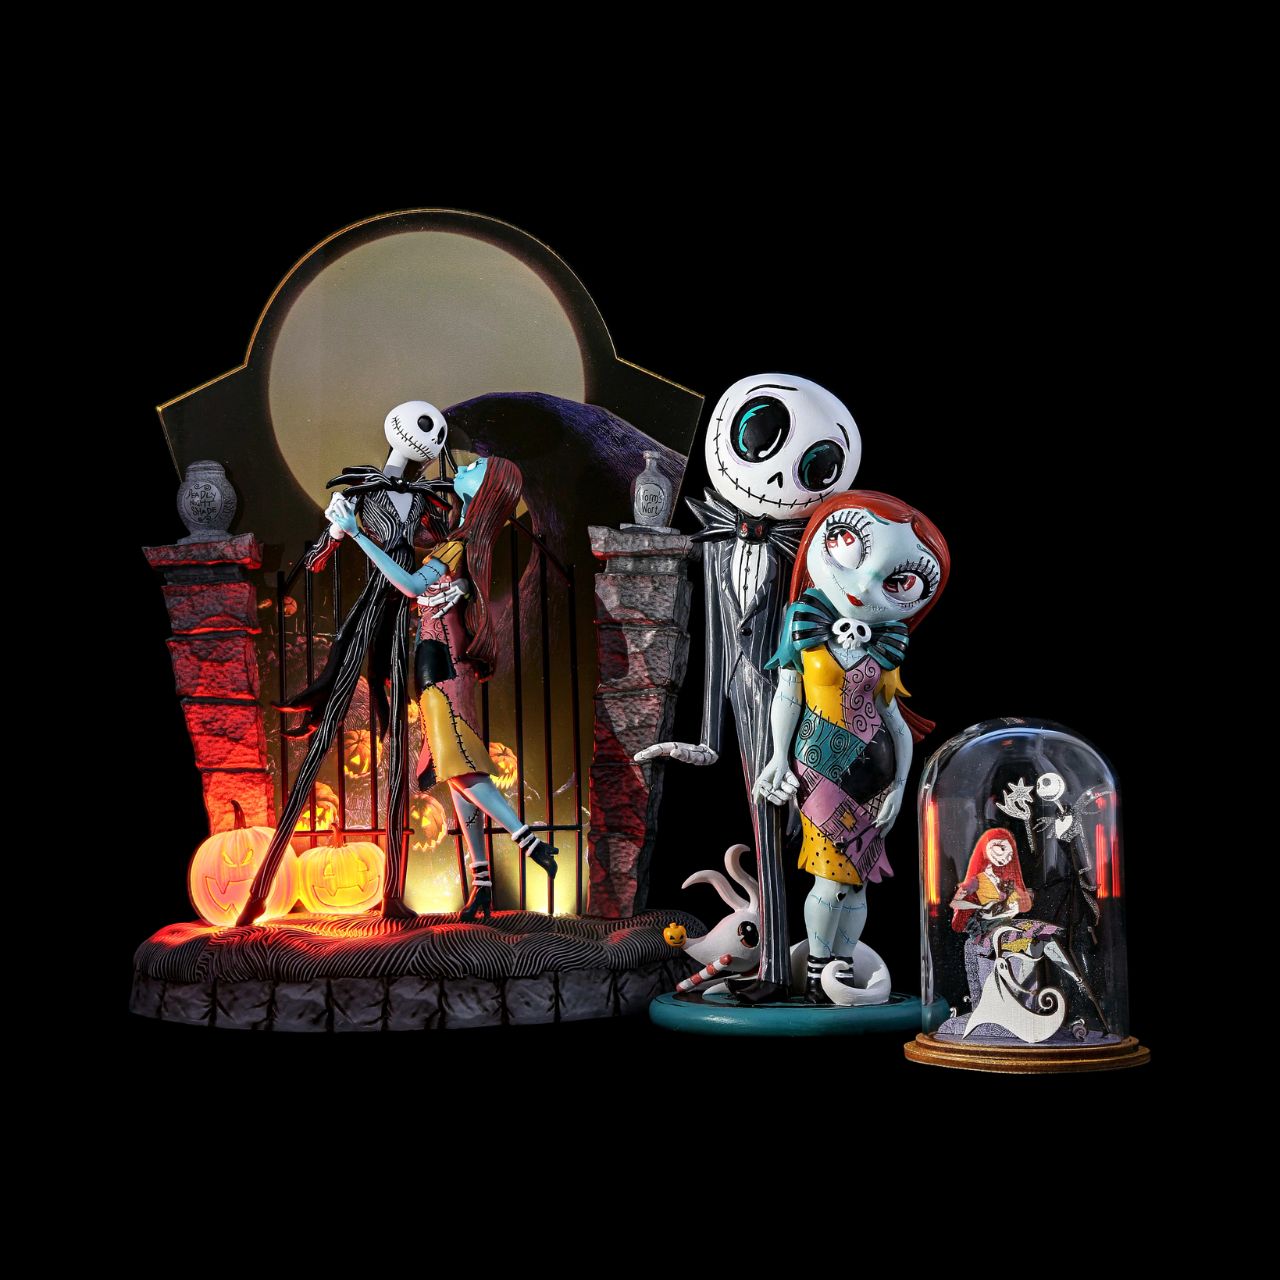 Will Sally the ragdoll's love change Jack Skellington's mind about taking over Christmas? This is a sweet pair with Zero make the perfect gift for any Halloween Town fan. This classic Nightmare Before Christmas decorative Kloche will make a stunning display in any home.